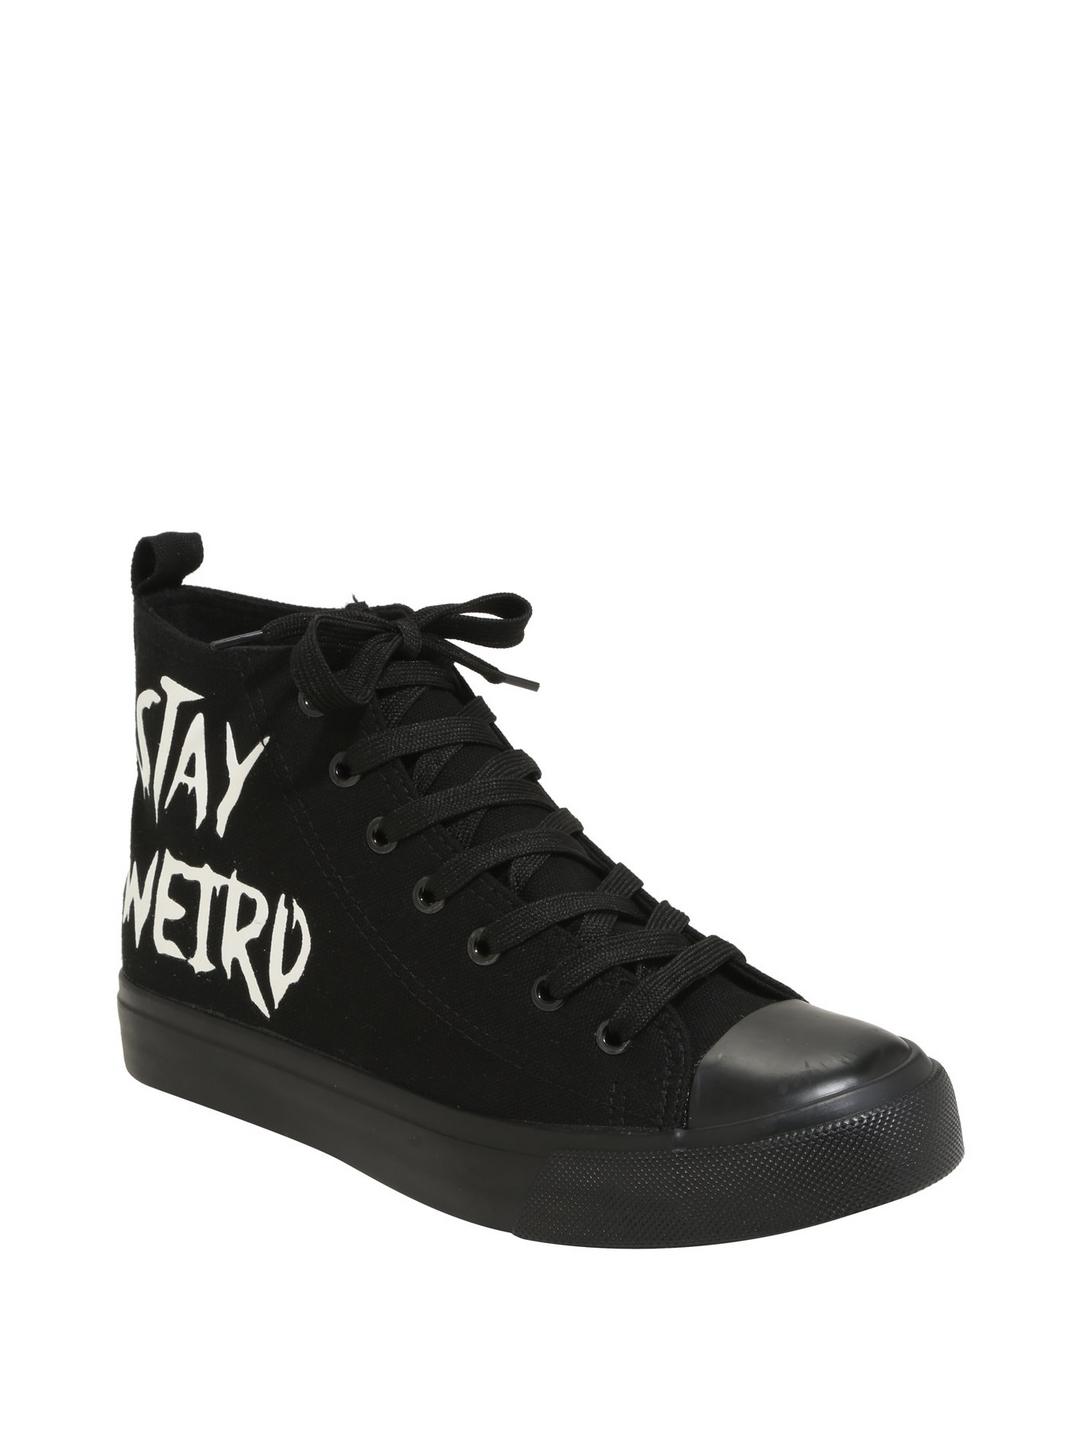 Plus Size Stay Weird Hi-Top Sneakers, BLACK, hi-res